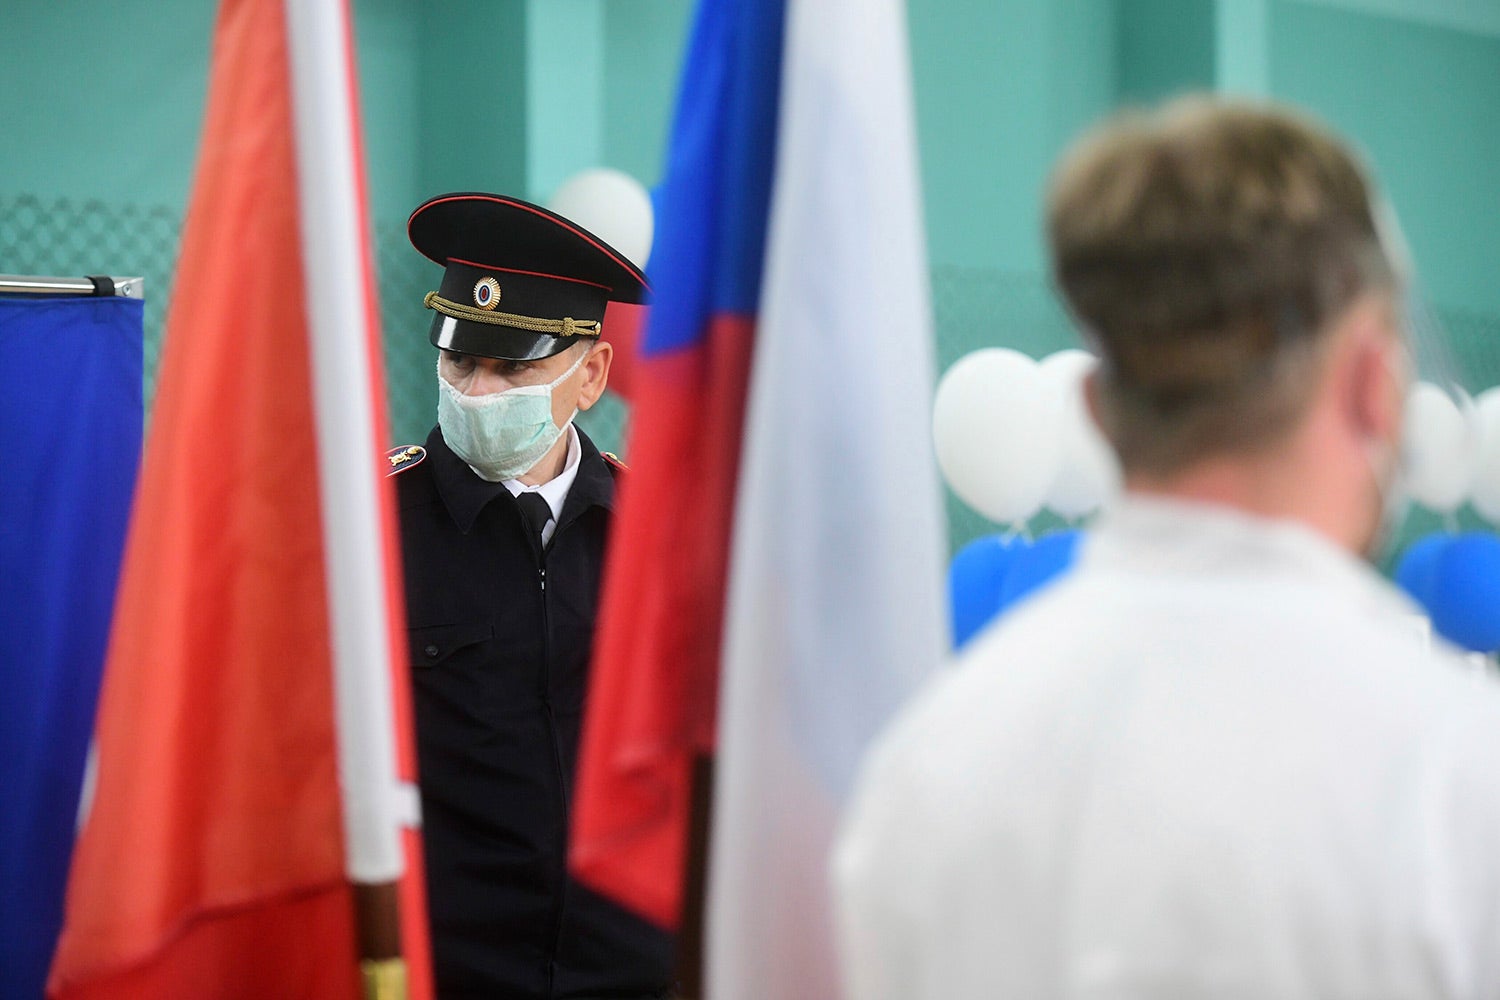 Police officer wearing face mask stands on duty at the polling station on July 1, 2020 in St. Petersburg, Russia.